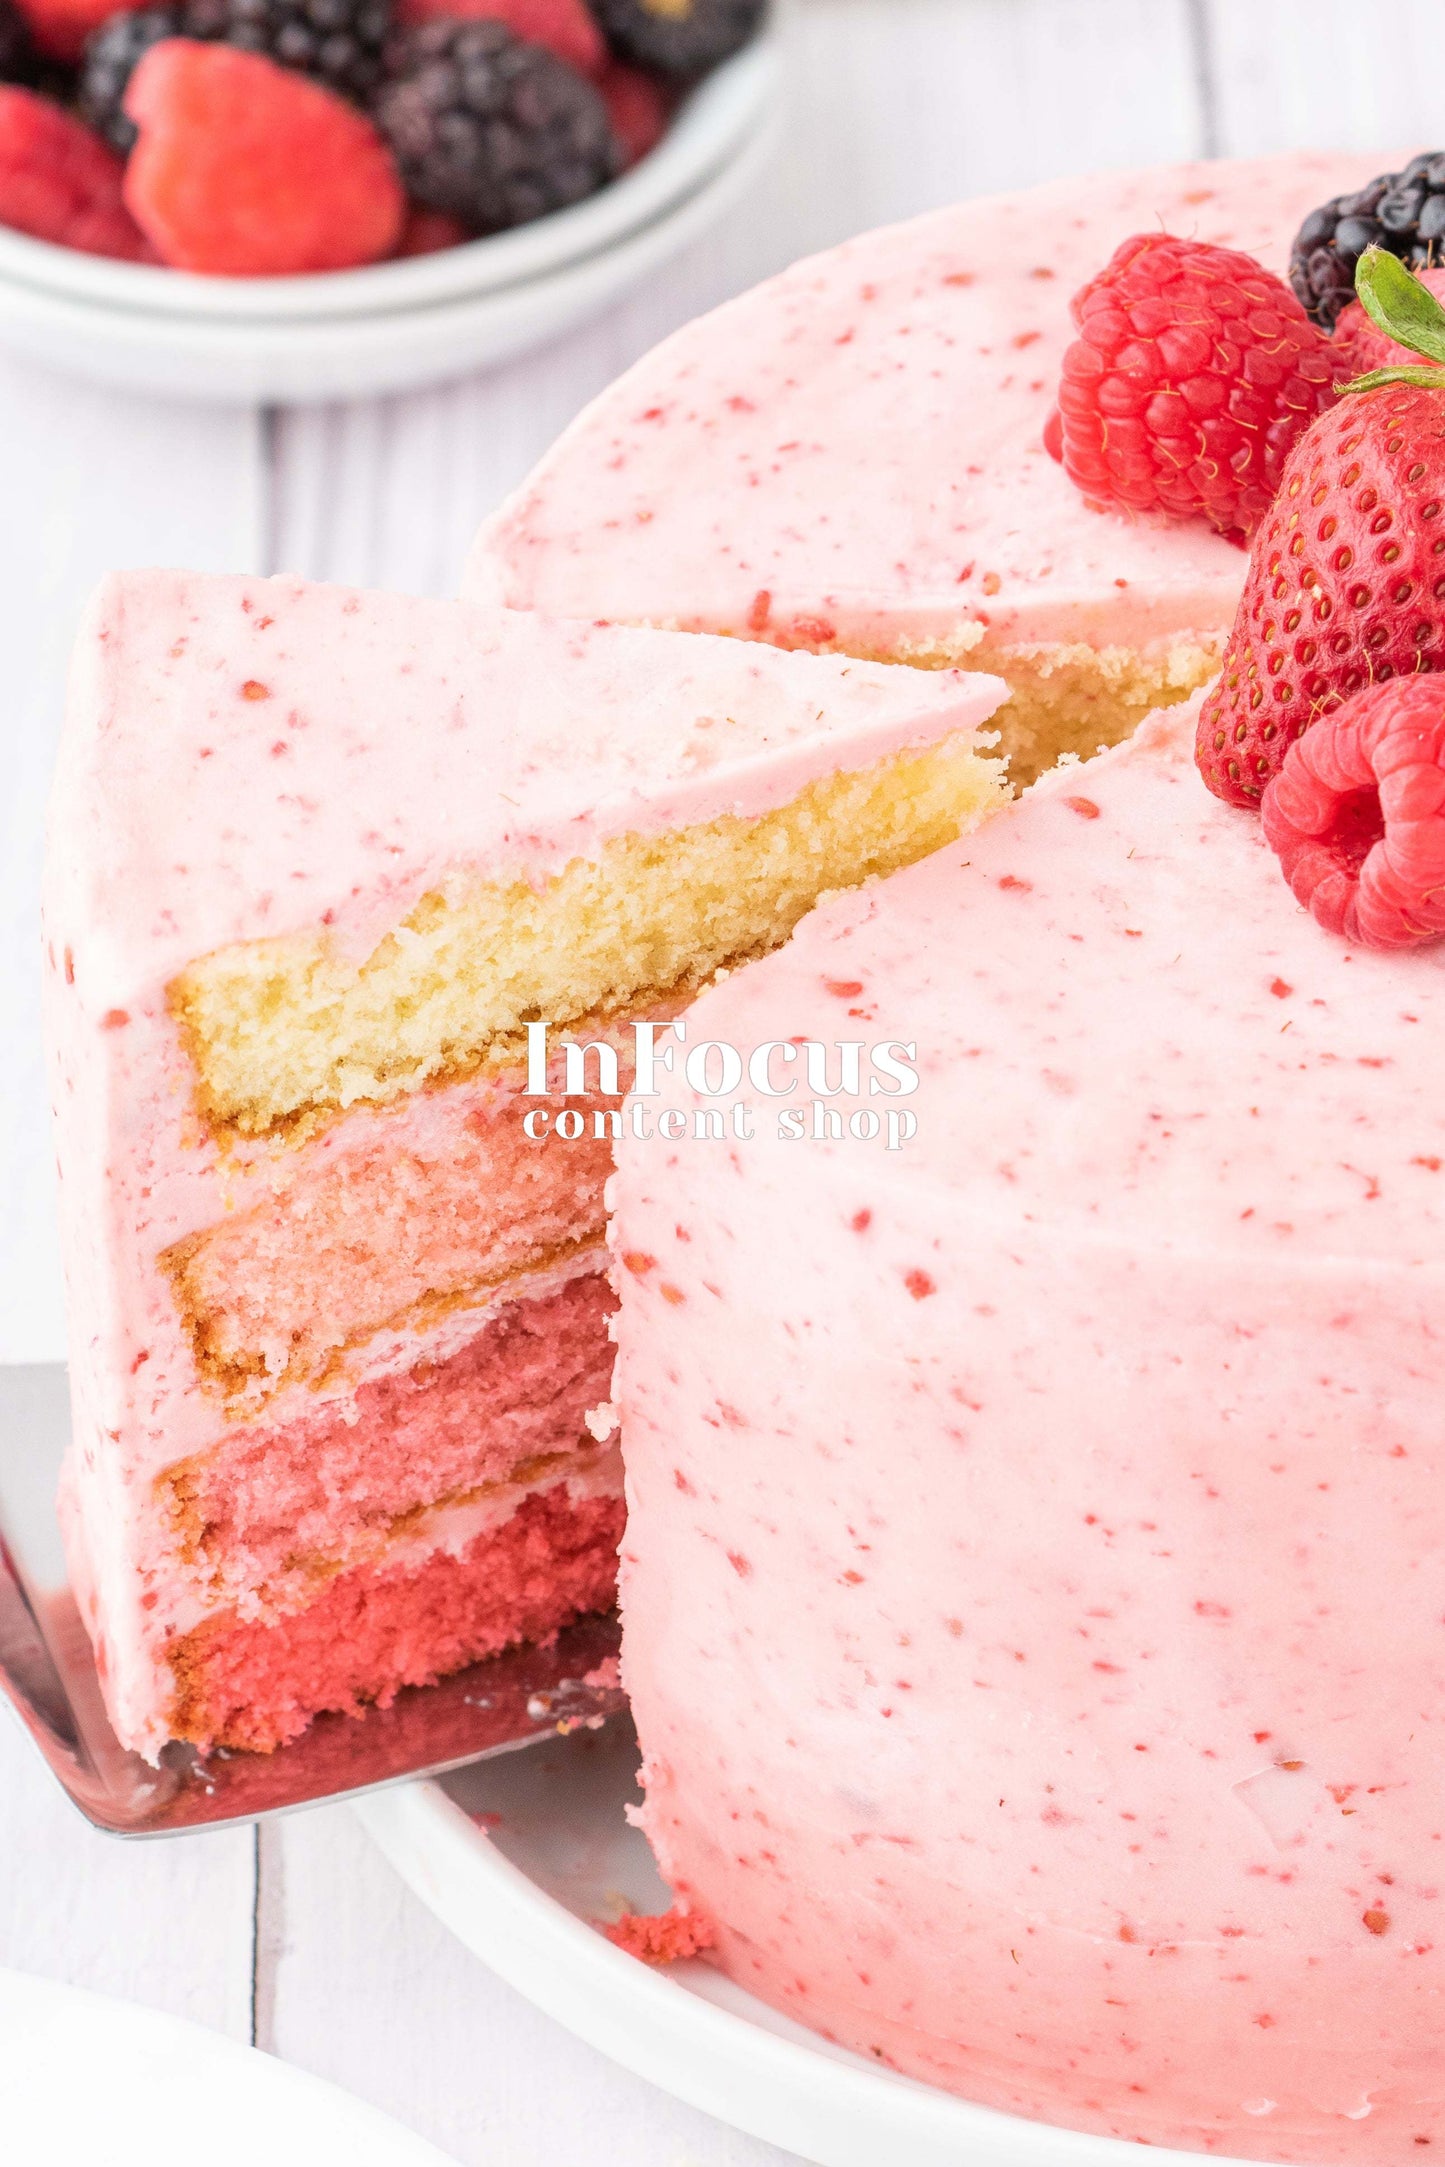 Mixed Berry Layer Cake- Semi-Exclusive Set 2